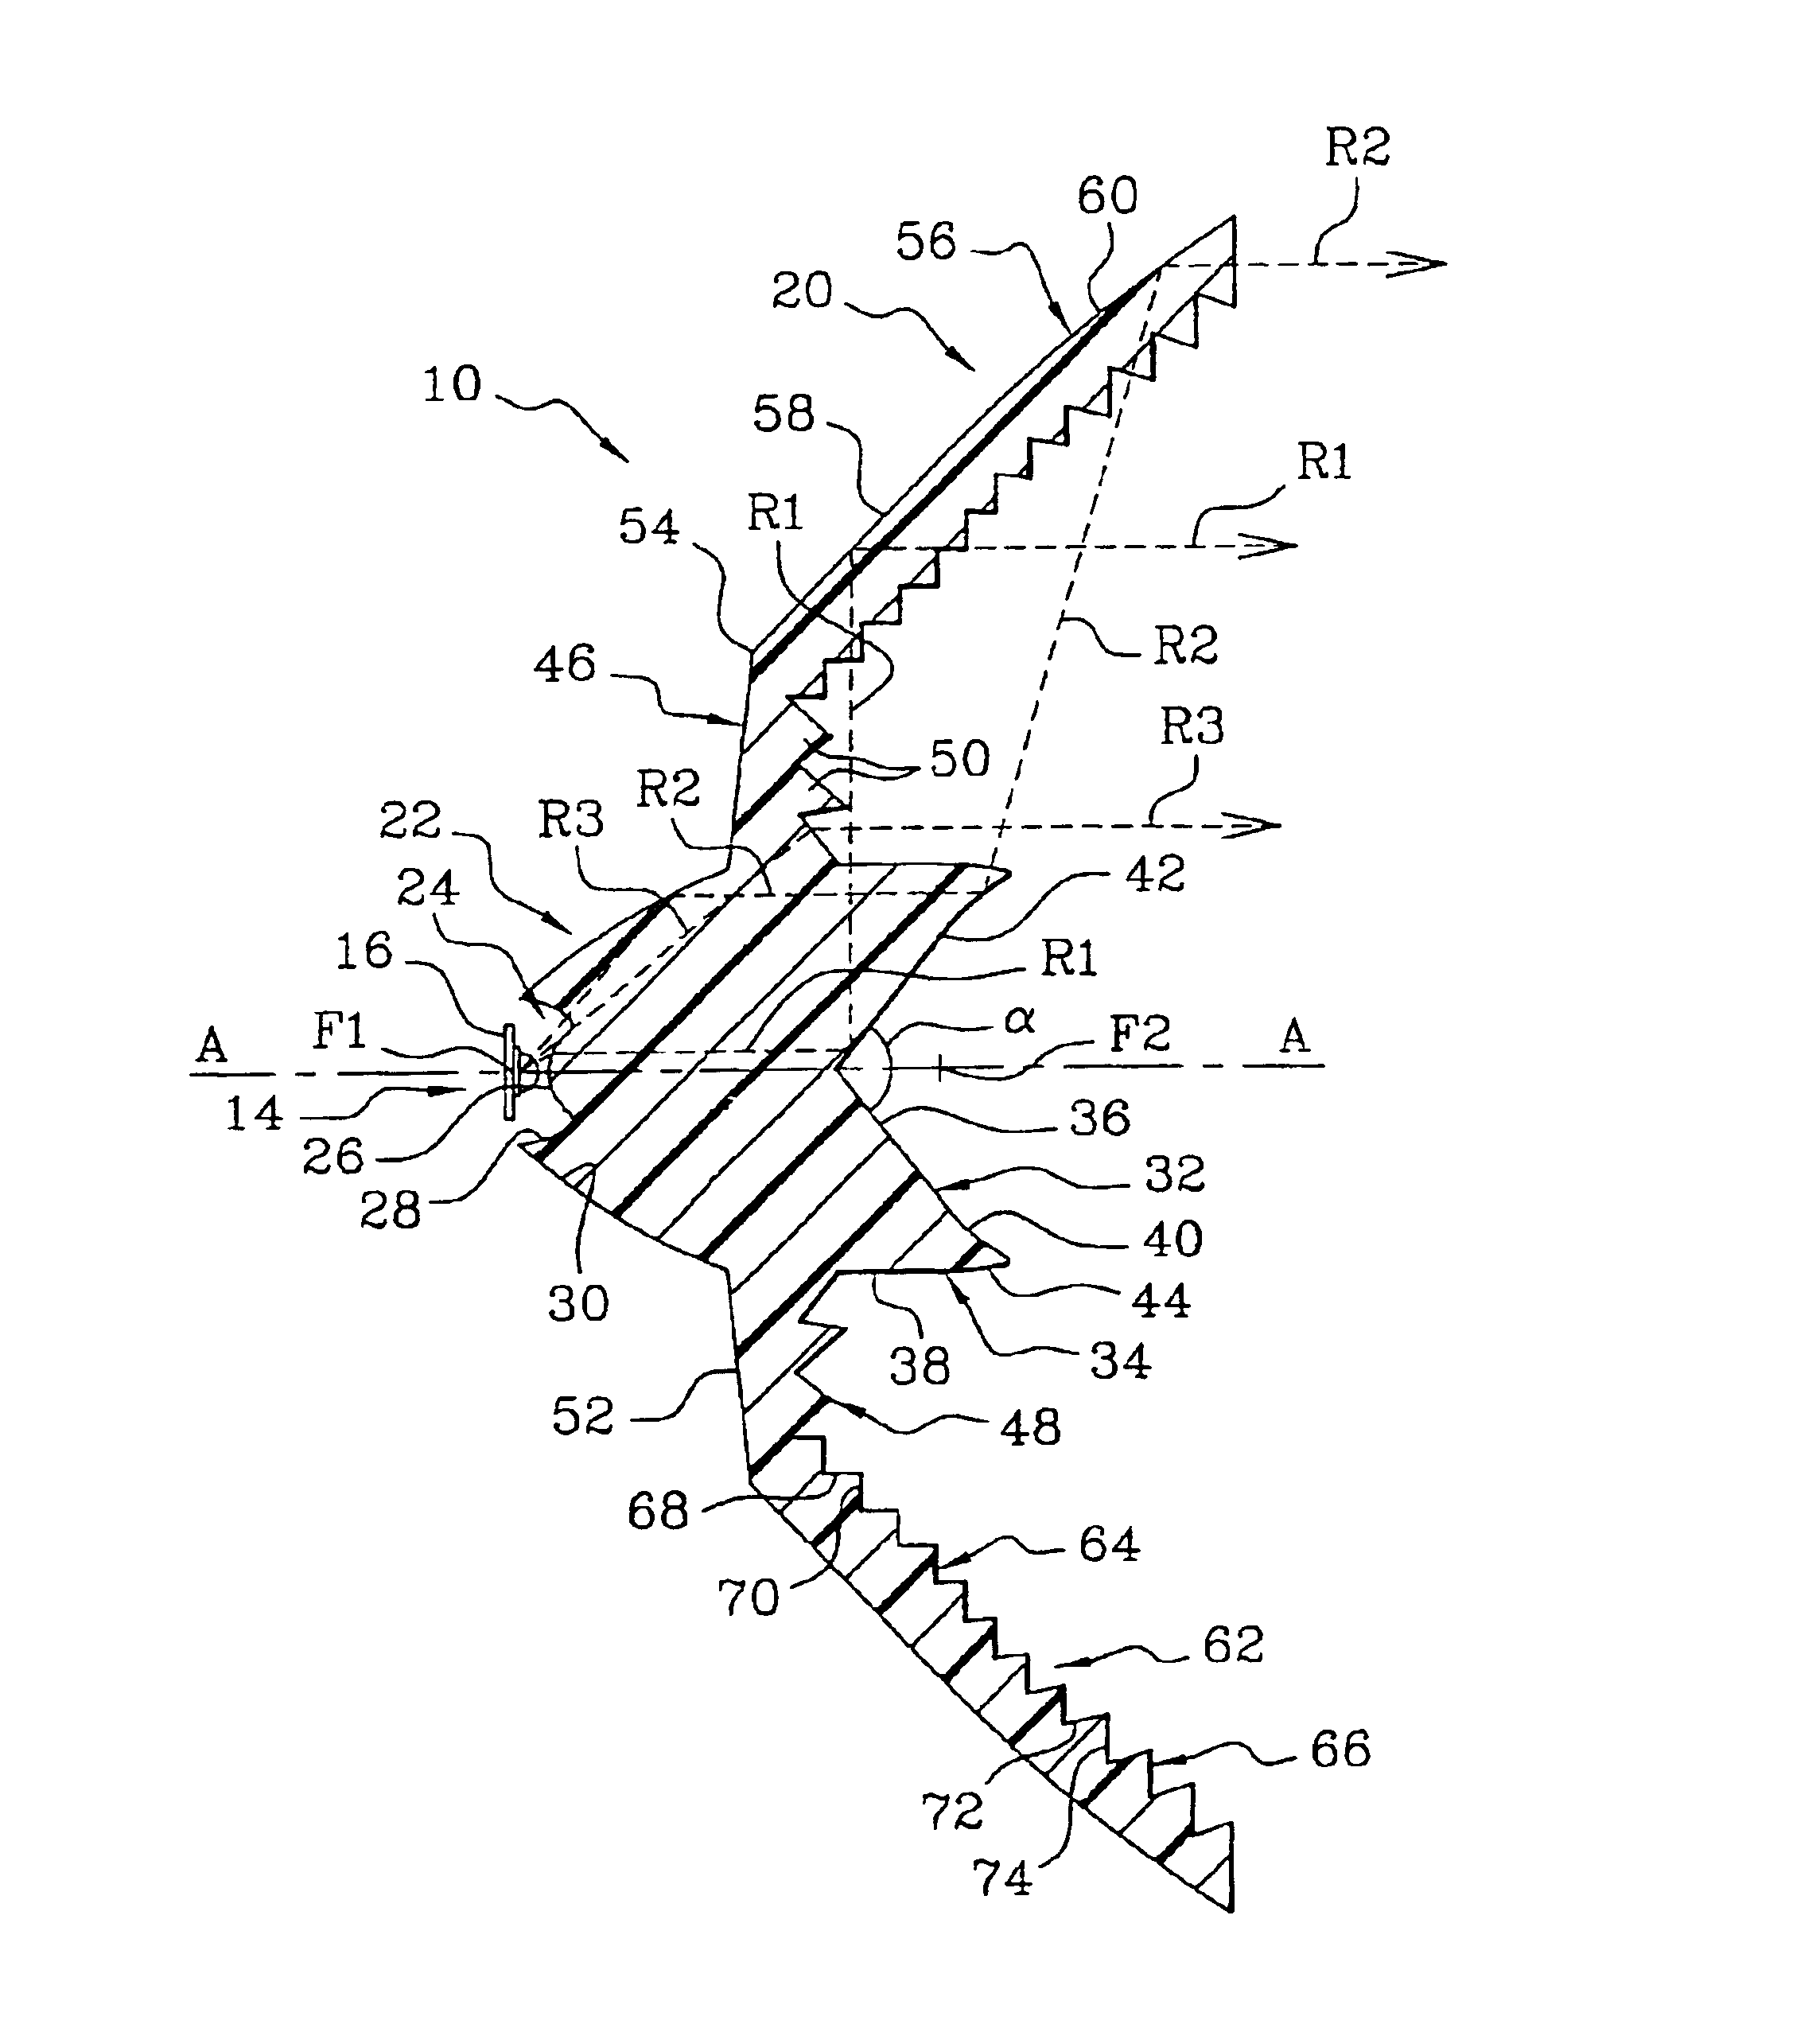 Indicator lamp comprising an optical device for recovering and distributing the light flux towards an annular reflector